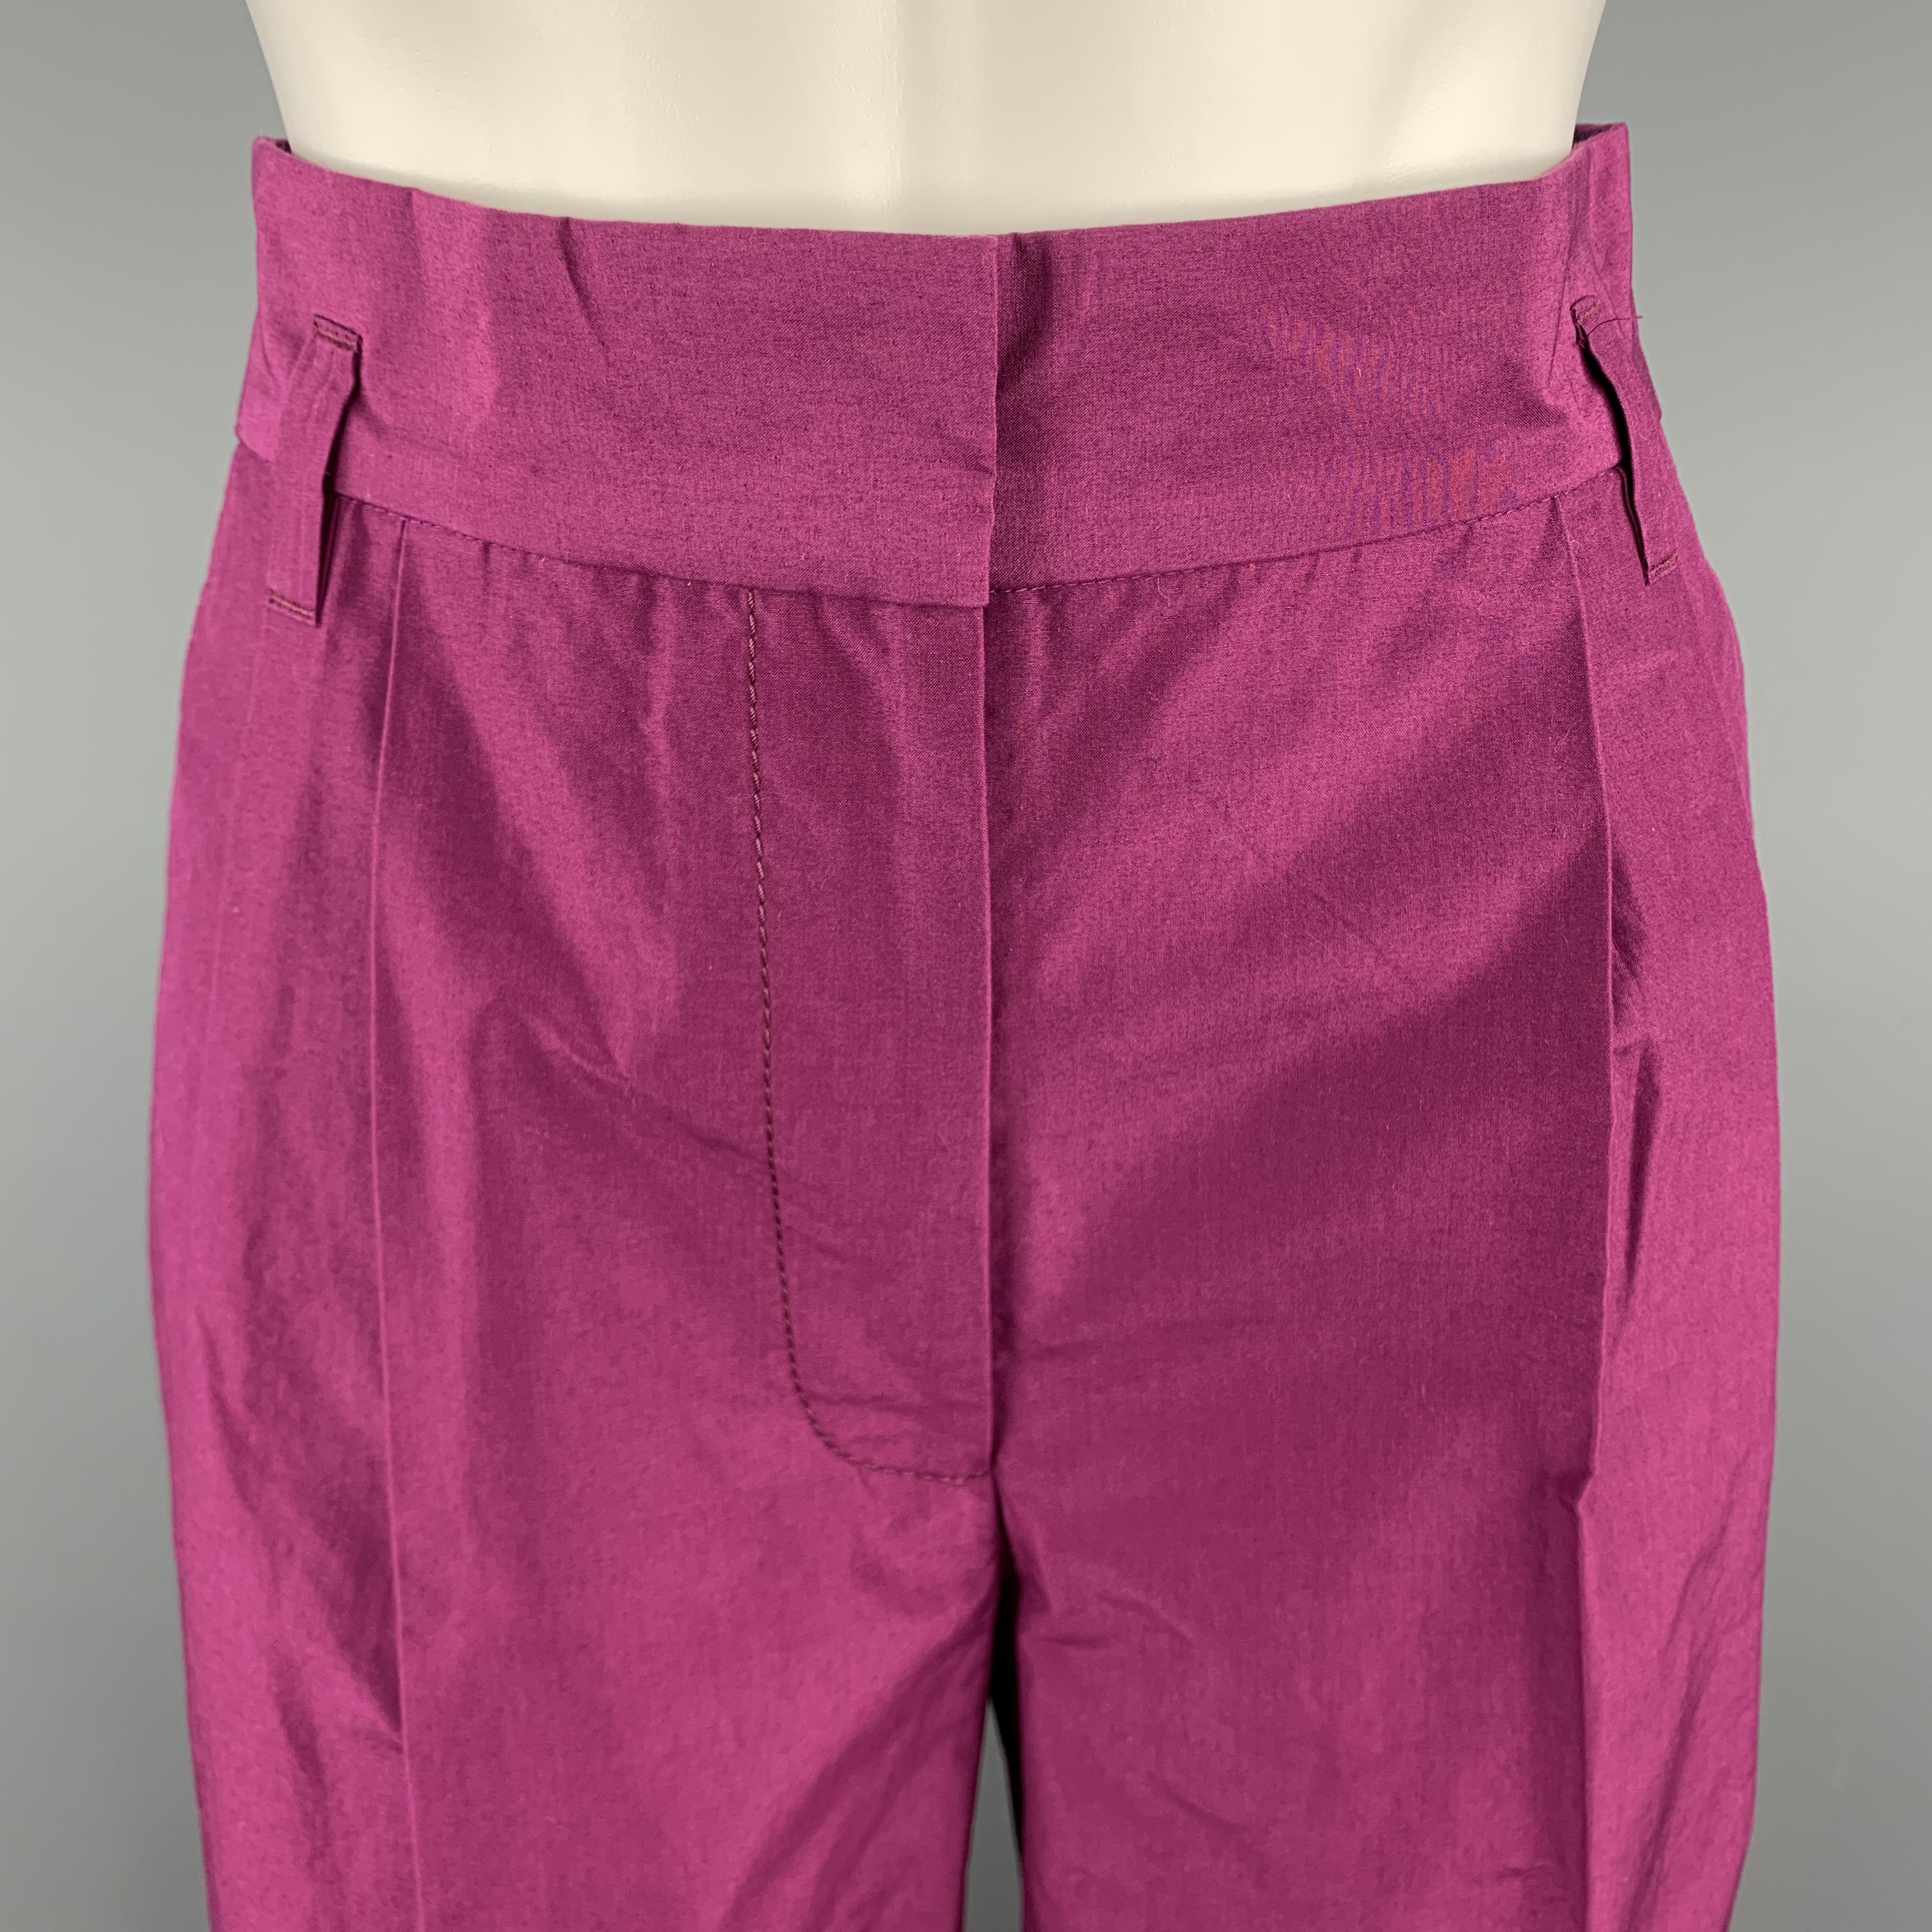 MARC JACOBS Dress pants comes in a purple solid cotton material, with a high waist, a pleated front, belt loops, wide legs, zip fly, and seam and slit pockets. Made in USA. 

New With Tags.
Marked: 0

Measurements:

Waist: 26 in. 
Rise: 11 in.